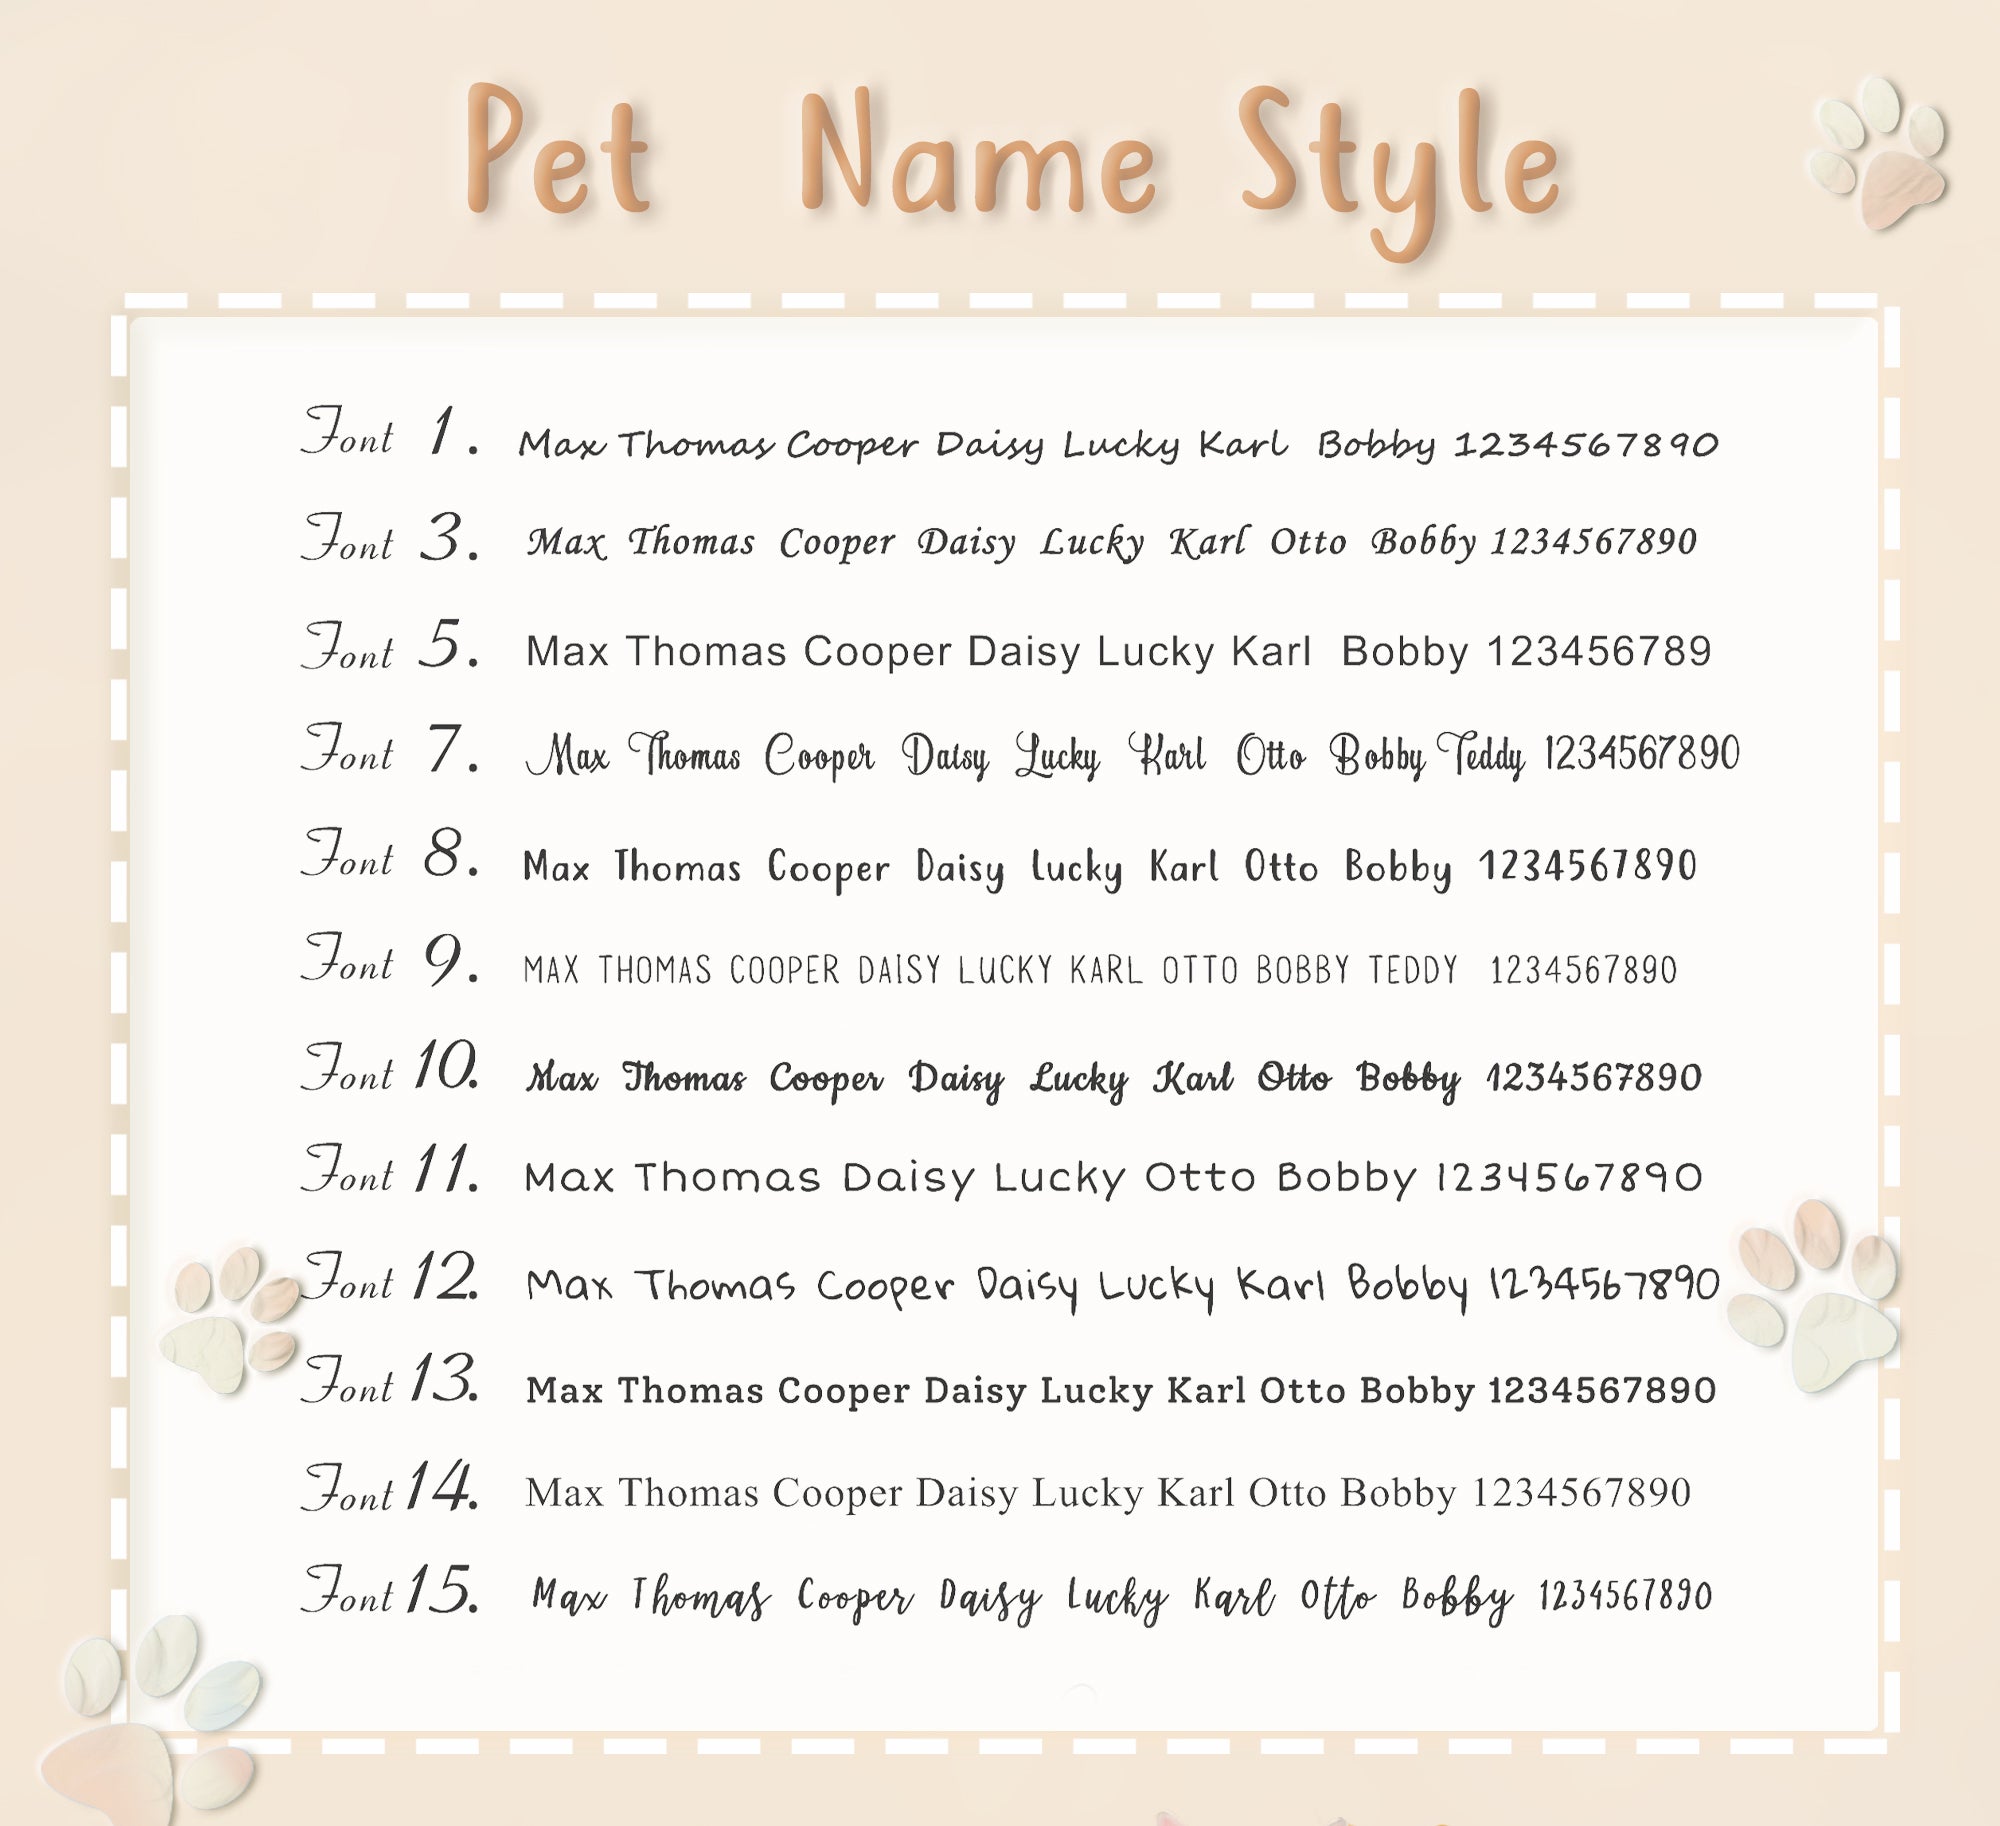 Personalized Dog Tag for Pets - No Noise - Engraved Dog Name Tag - Slide On  Cat ID Tags 